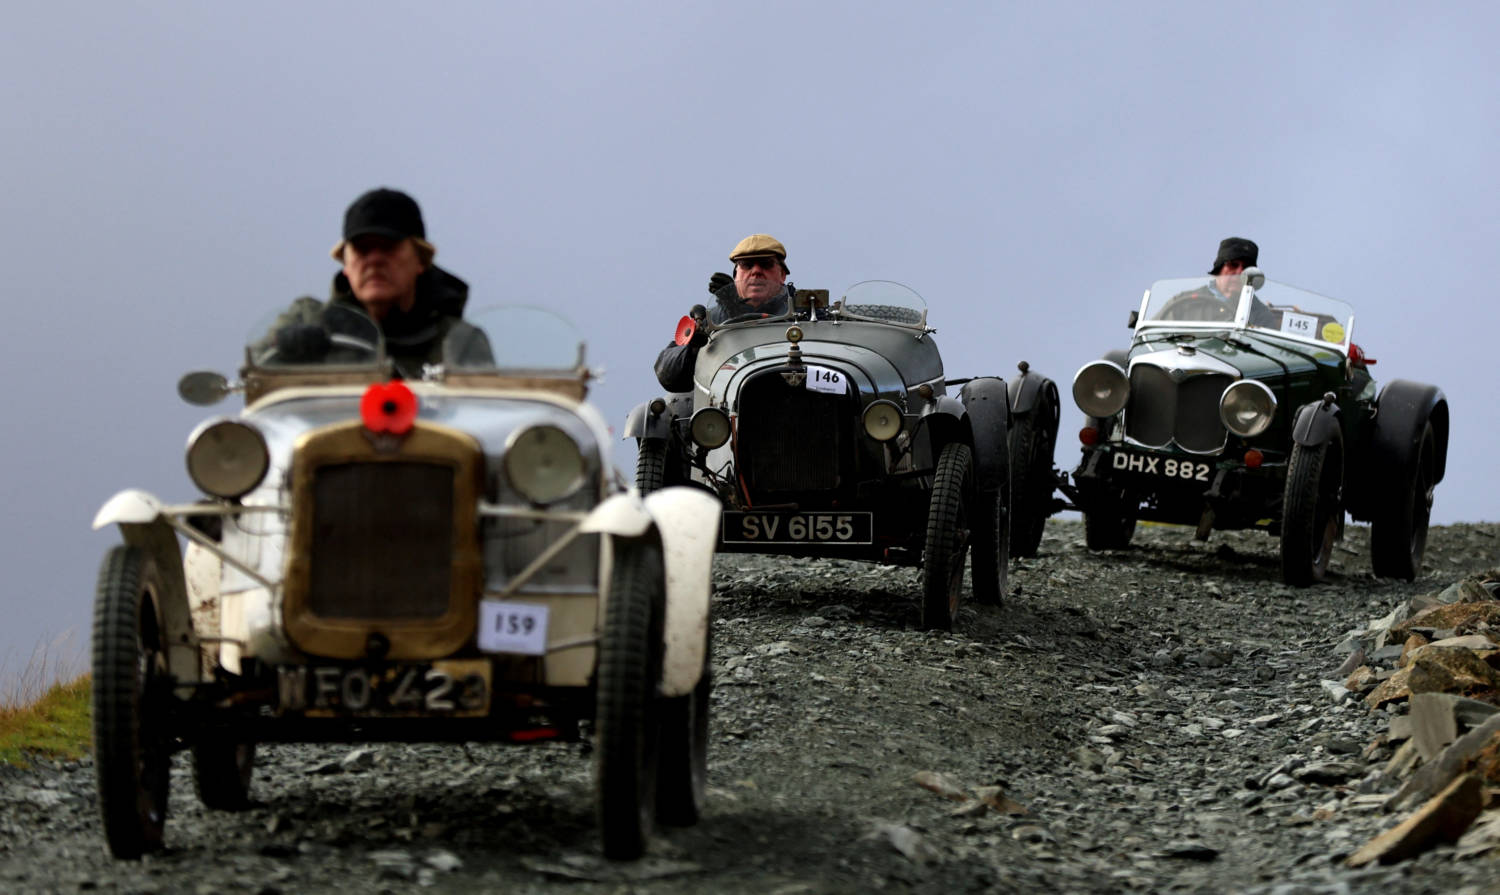 Motoring Enthusiasts Take Part In The Annual Vscc Lakeland Trial At Honister Slate Mine, In Keswick